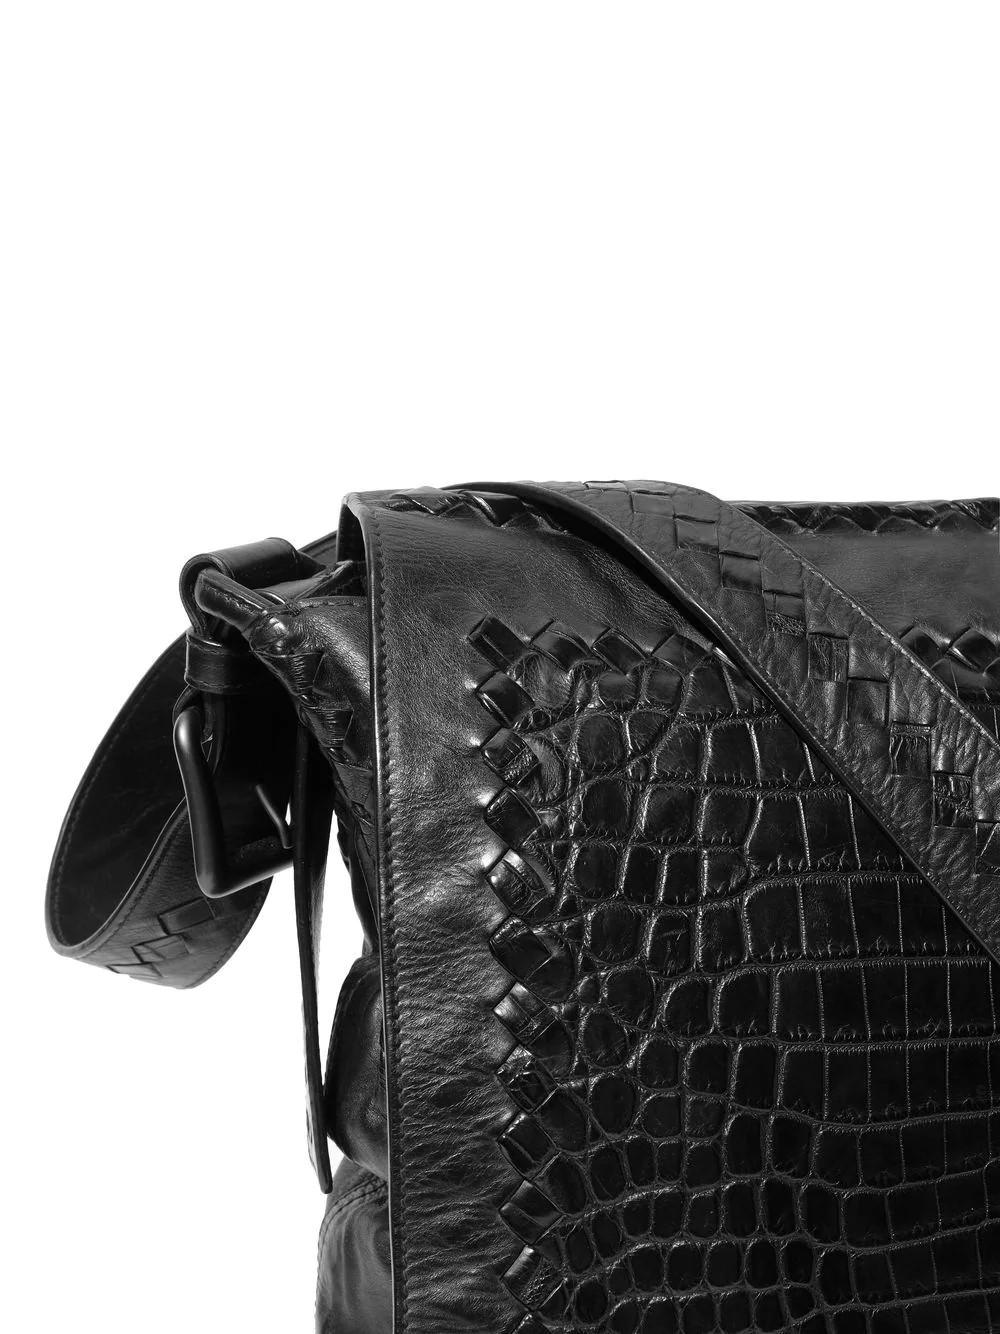 From Bottega Veneta's 2011 spring runway, this pre-owned messenger bag has been crafted from premium leather. The bag features a magnetic flap closure embellished by the signature intrecciato piping, which symbolizes the brand's craftsmanship and